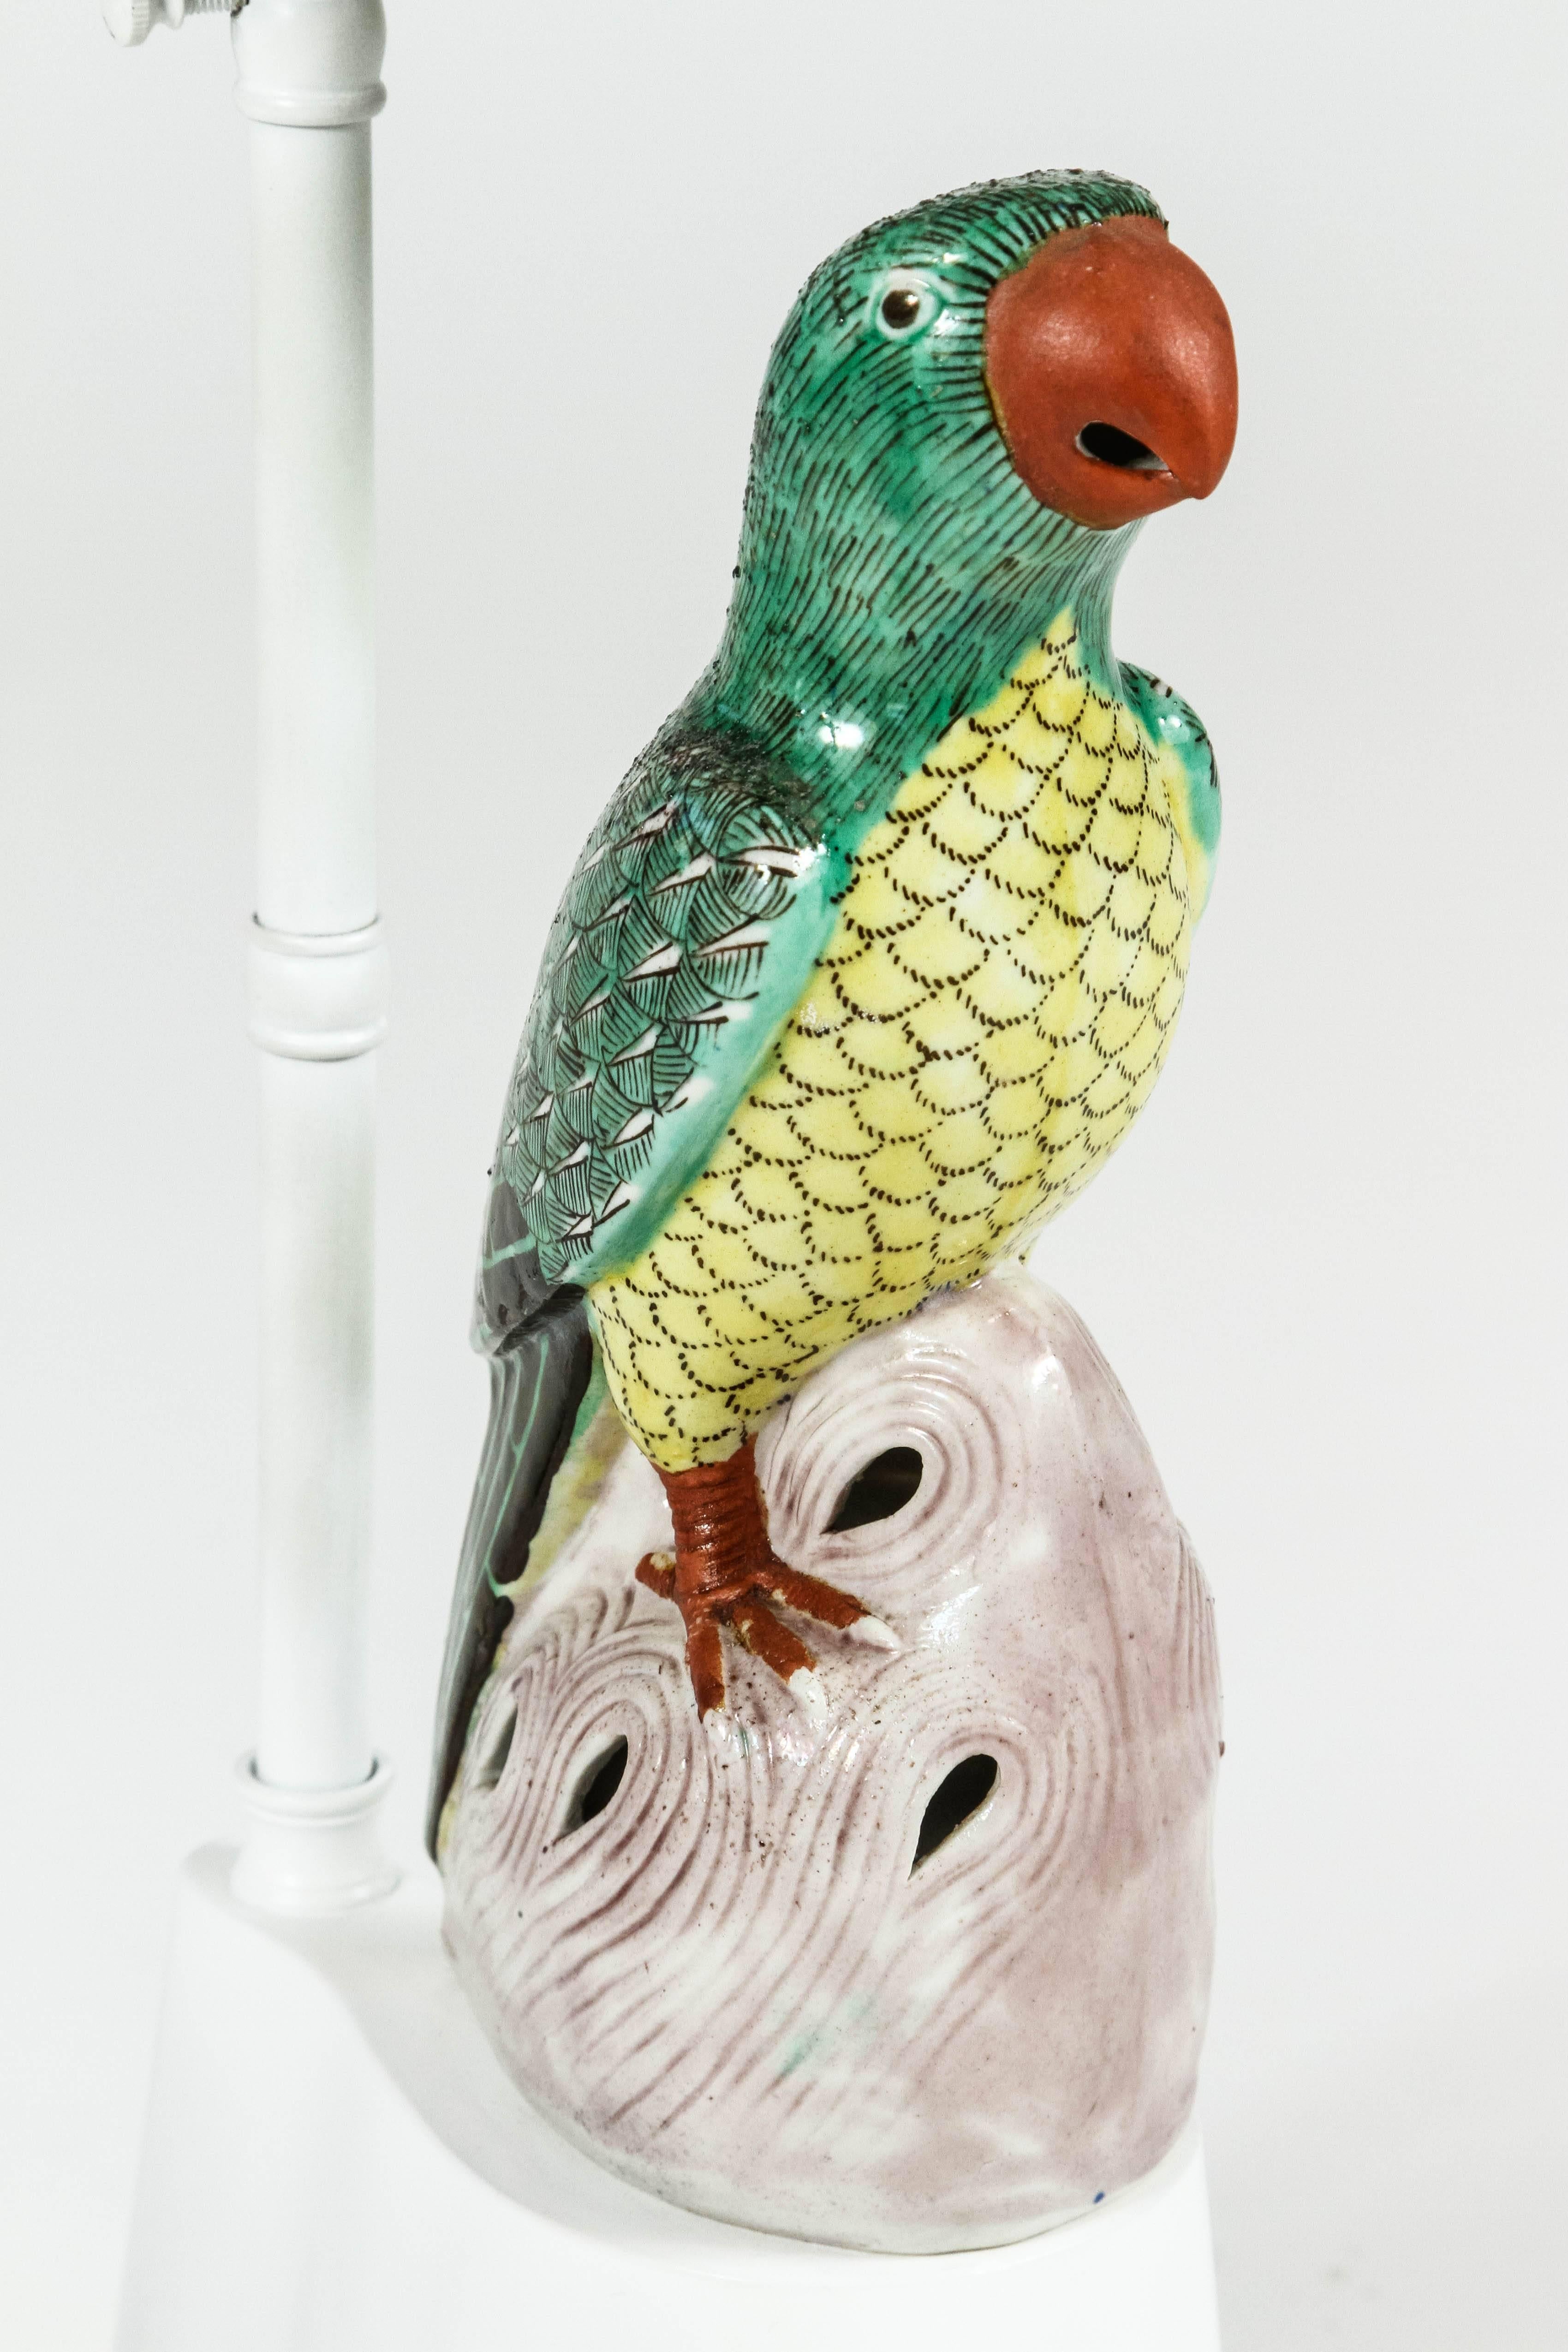 Glazed Parrot Lamp by William Haines